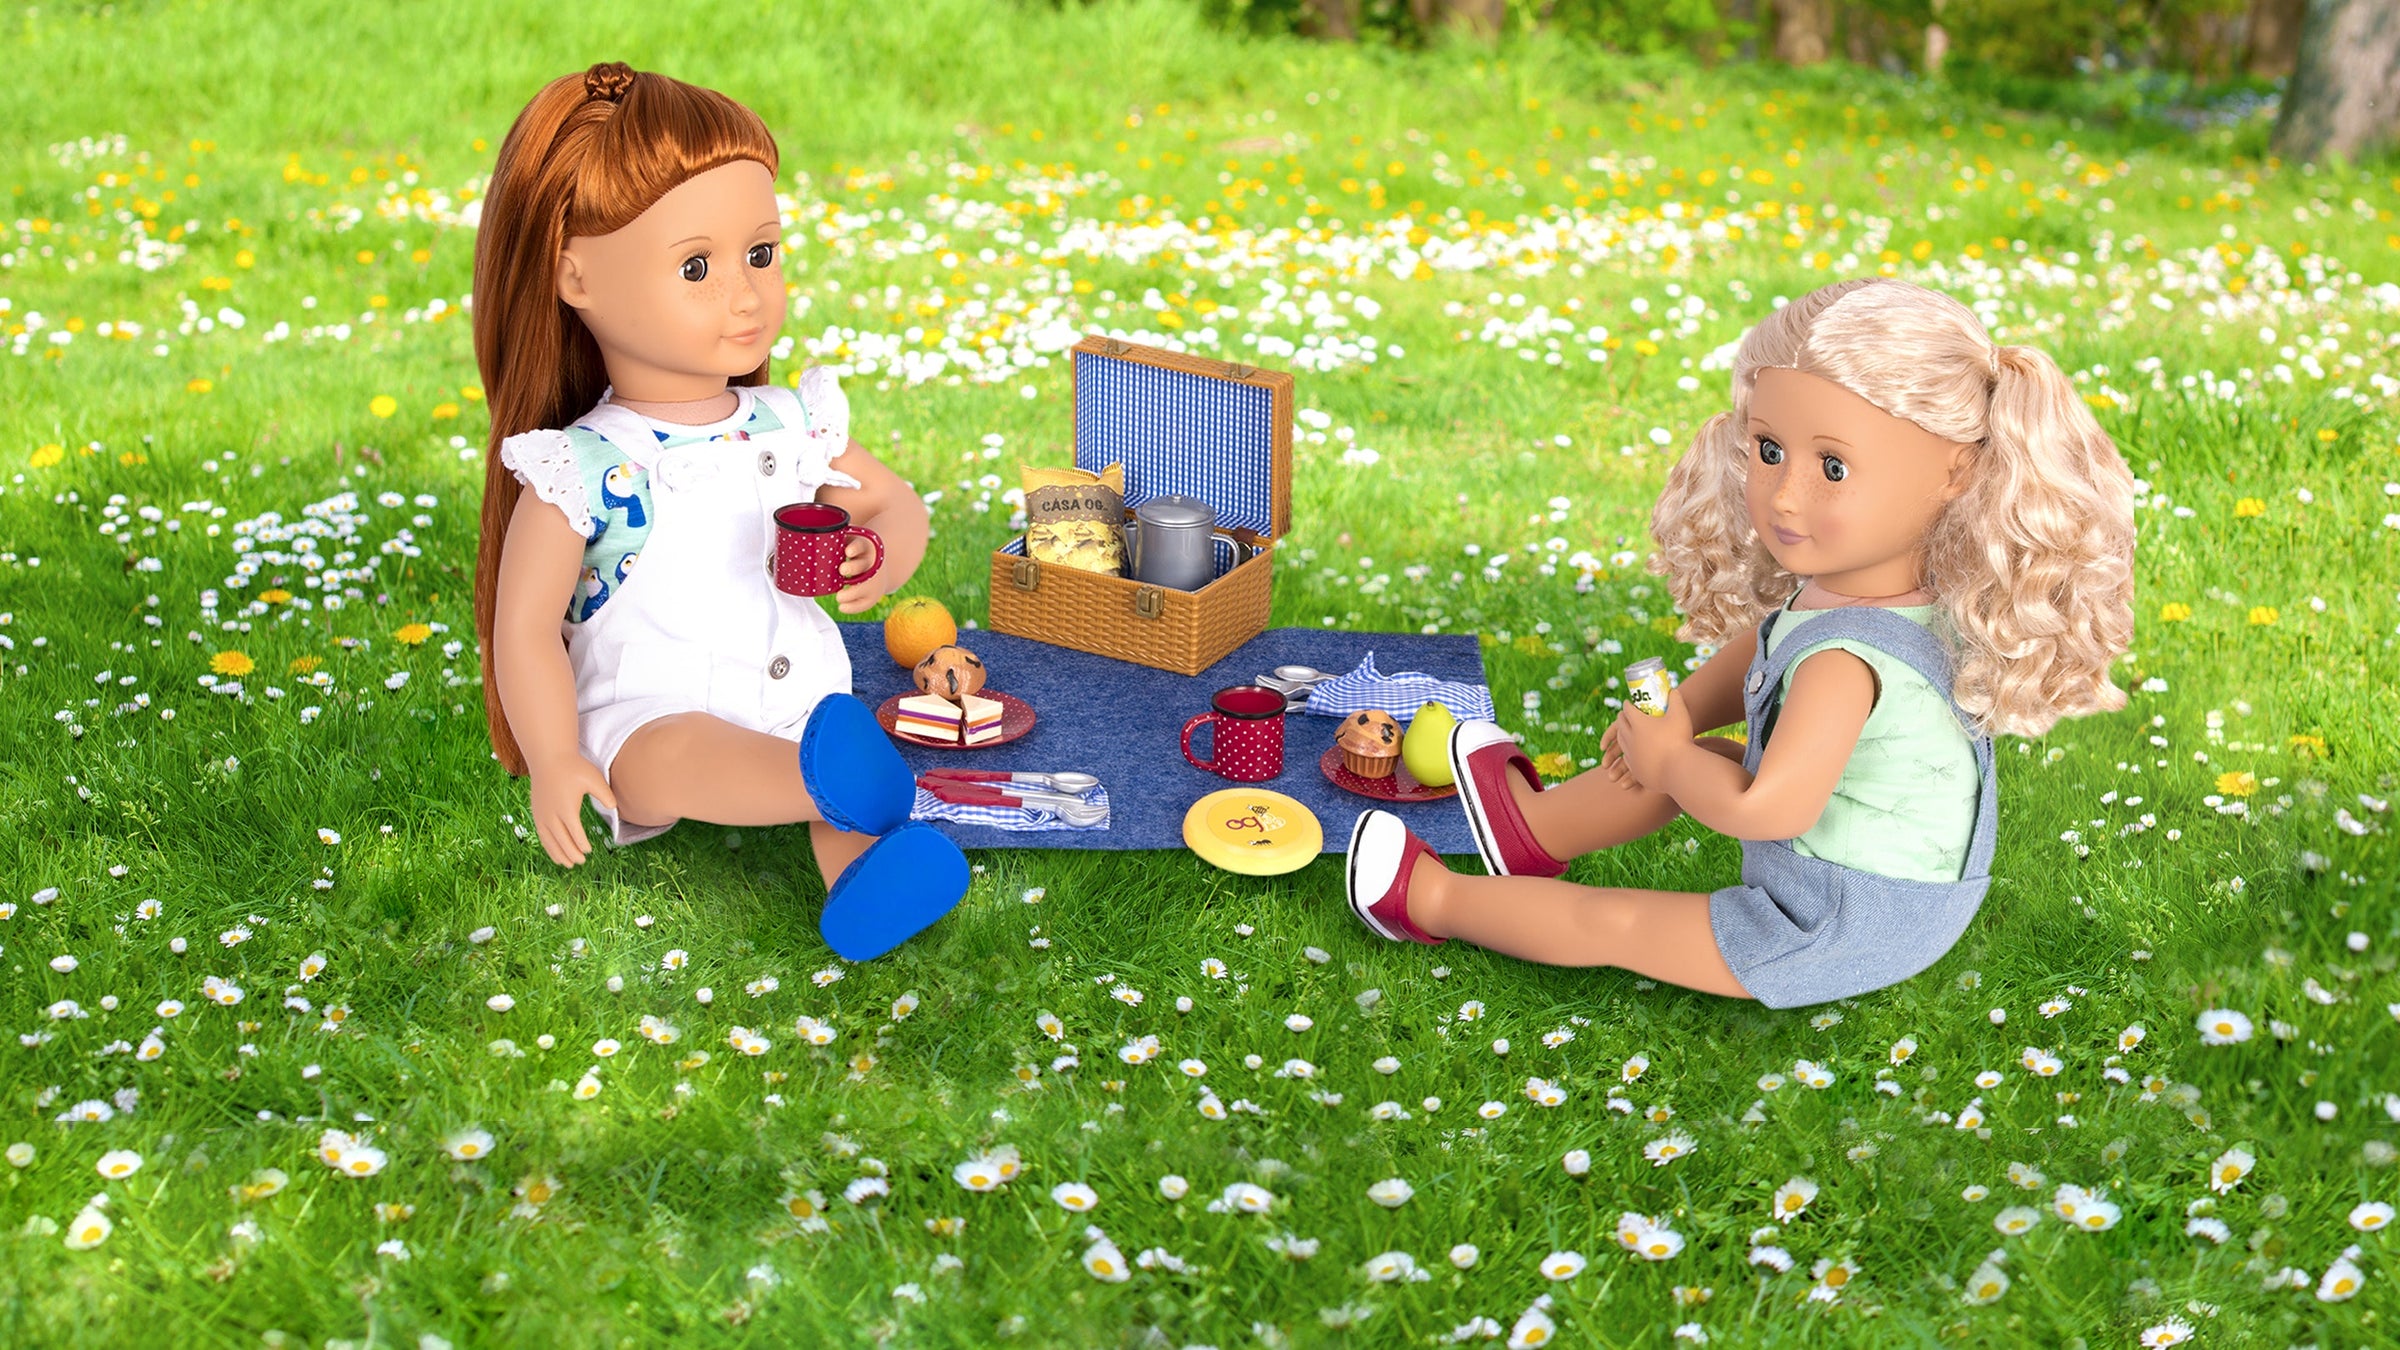 Two Dolls enjoying Picnic in the park with a Picnic Basket and Food